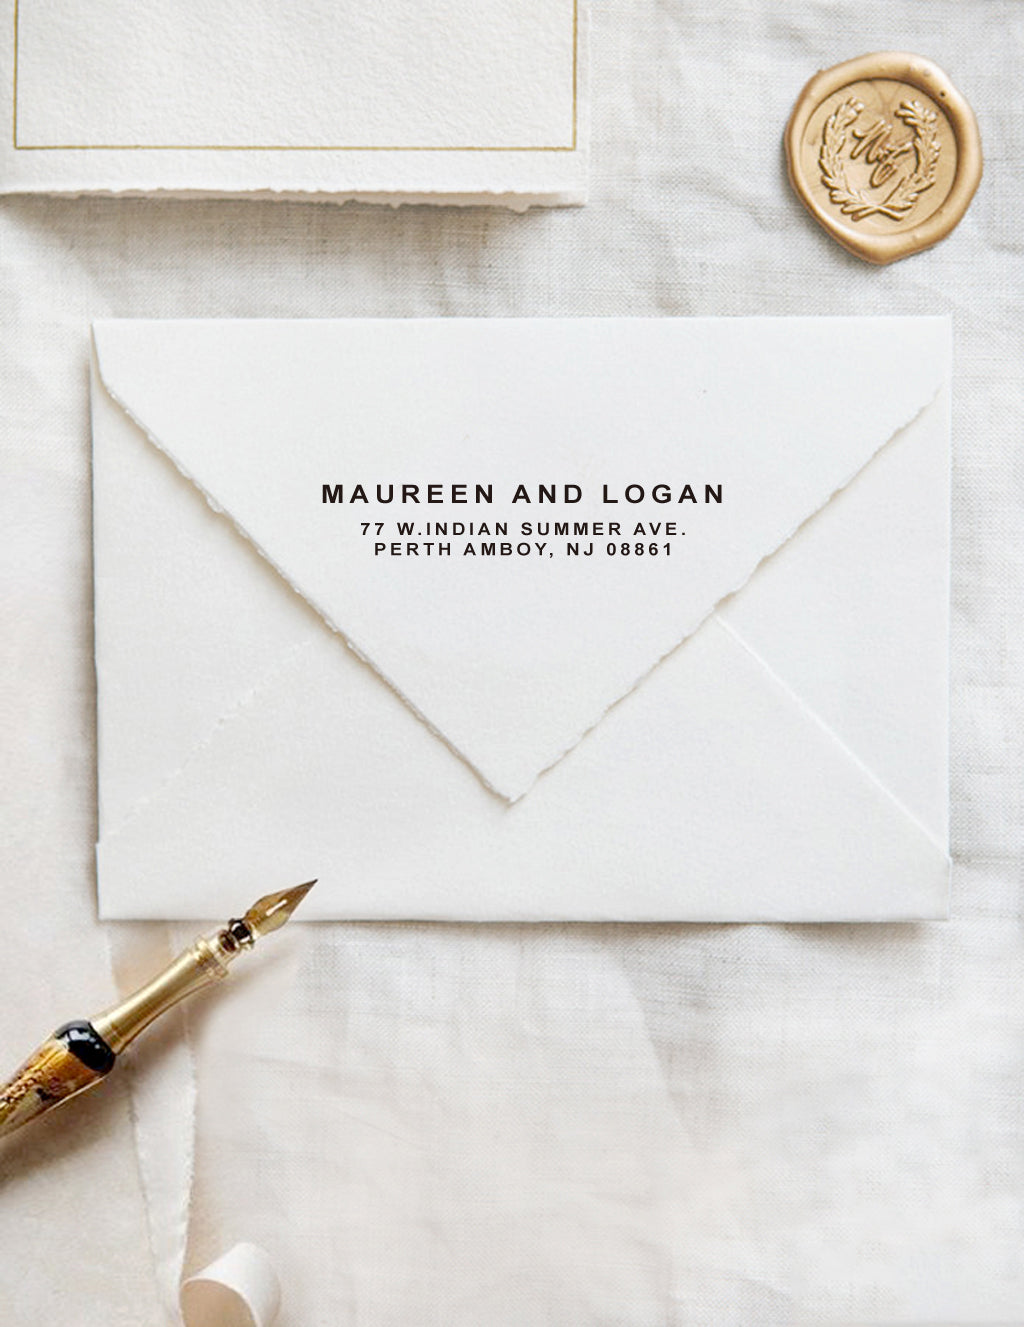 A personalized wedding self inking address stamp, customized with your name and address, stamped on the white envelope, beside it, a wax seal is waiting for sealing the mail.